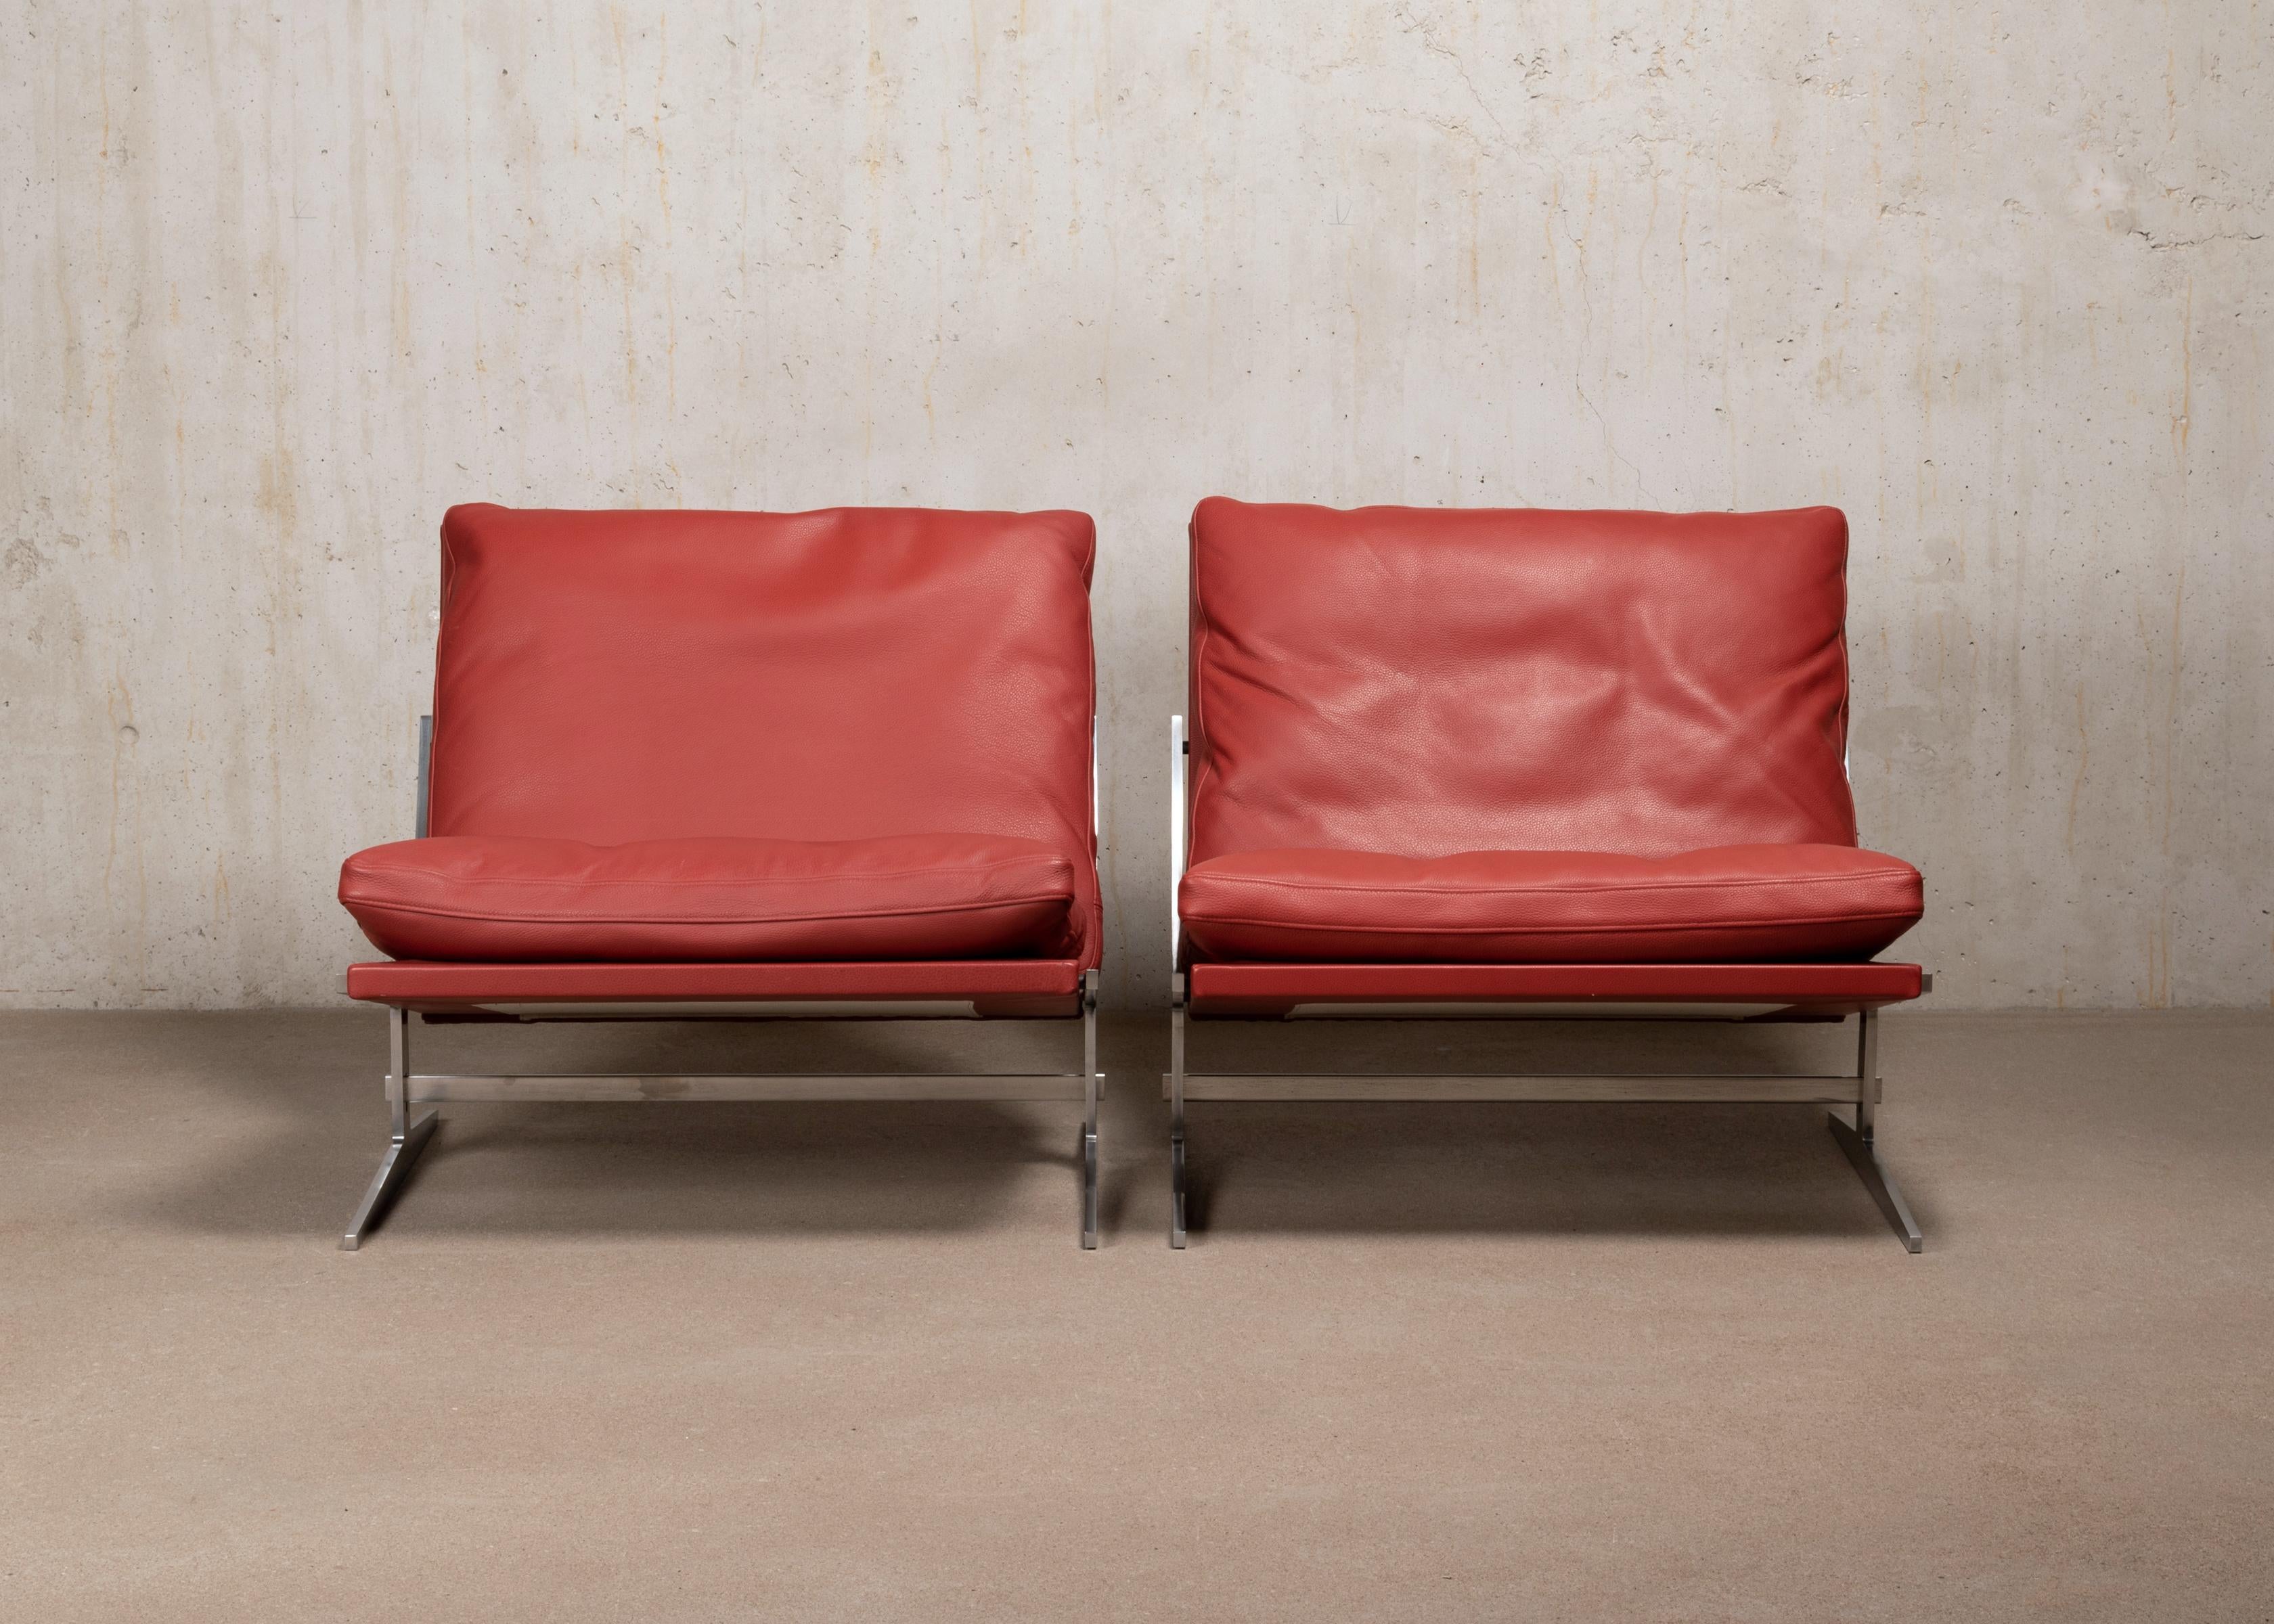 Scandinavian Modern Pair of Kastholm & Fabricius BO-561 Lounge Chairs in Ruby Red Leather by Bo-Ex